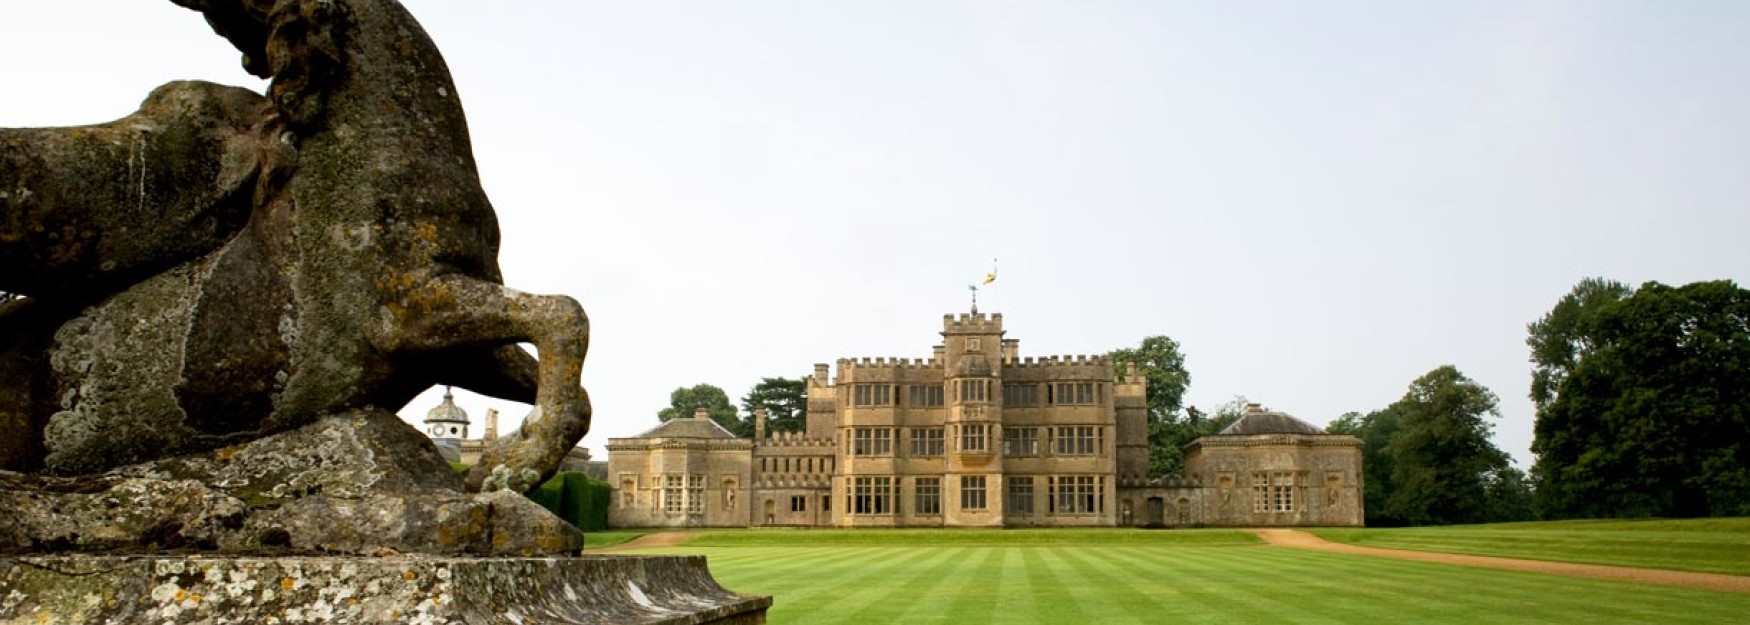 Rousham House from a distance (photo Harpur Garden Images)